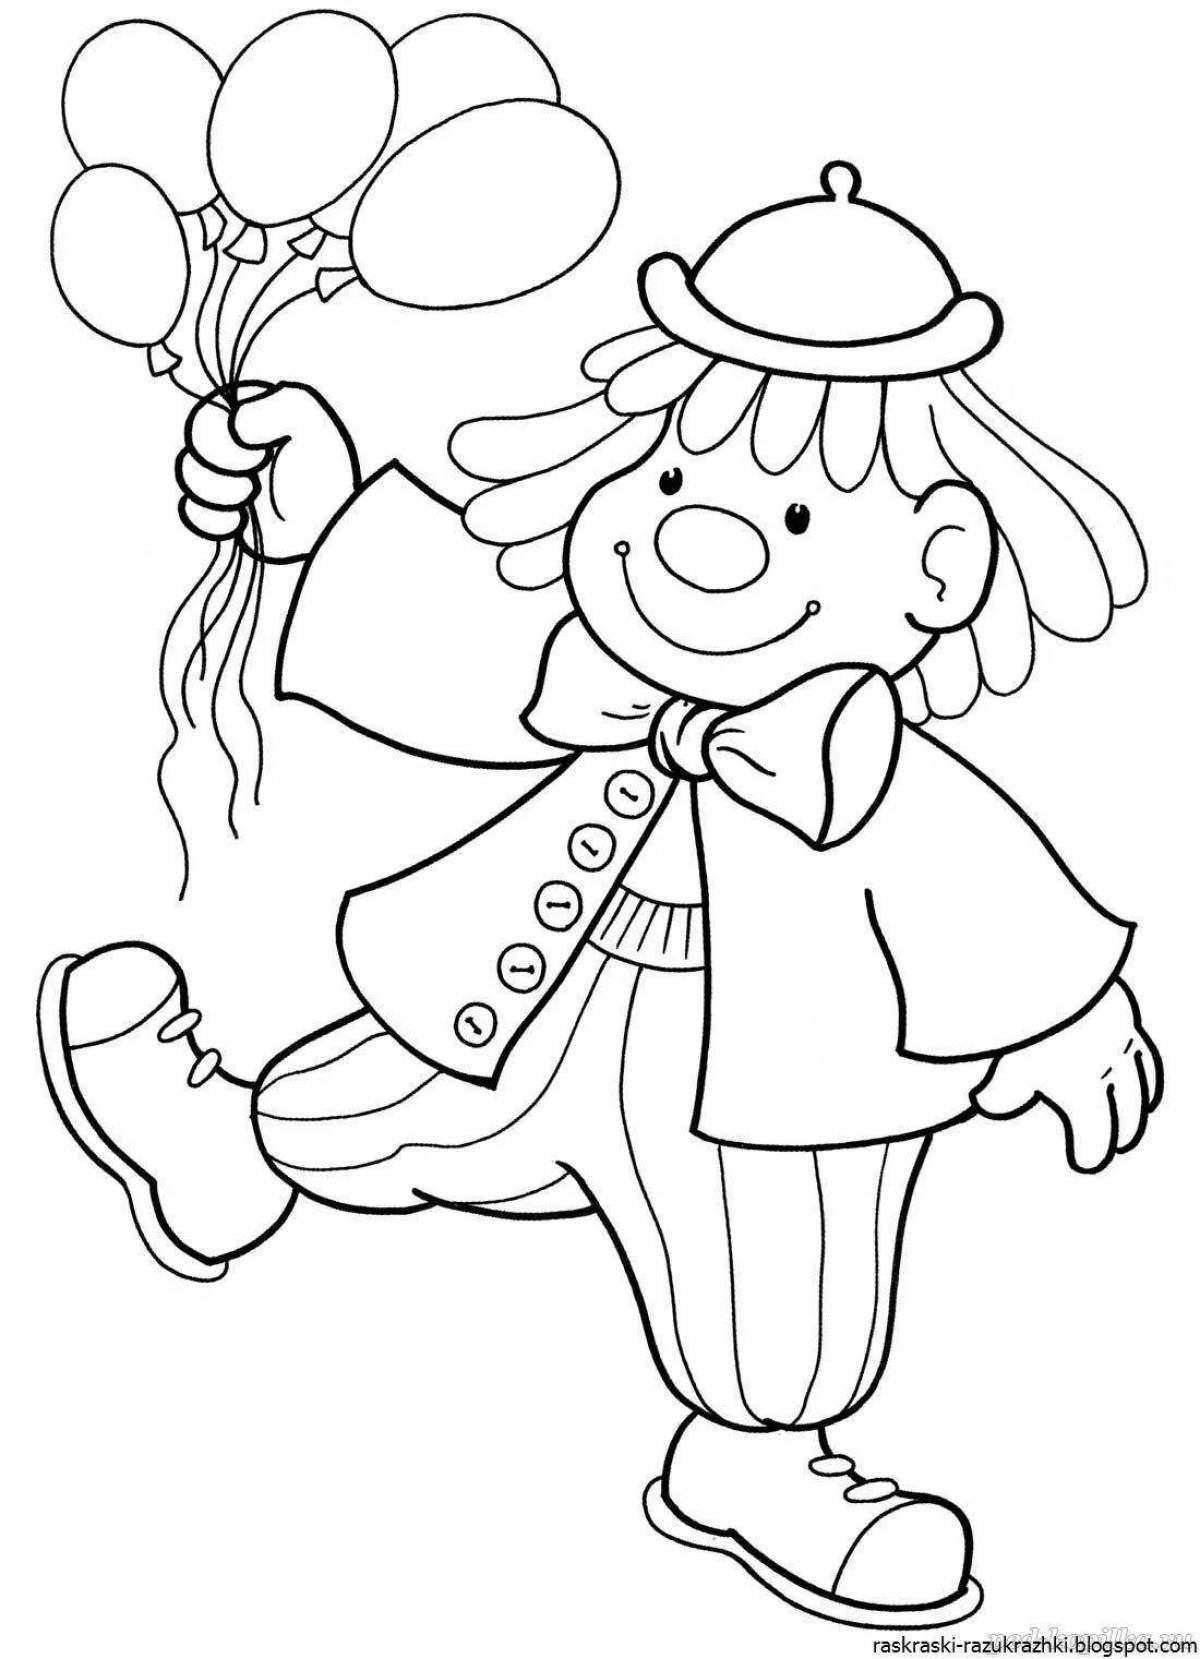 Coloring book cute clown for children 6-7 years old